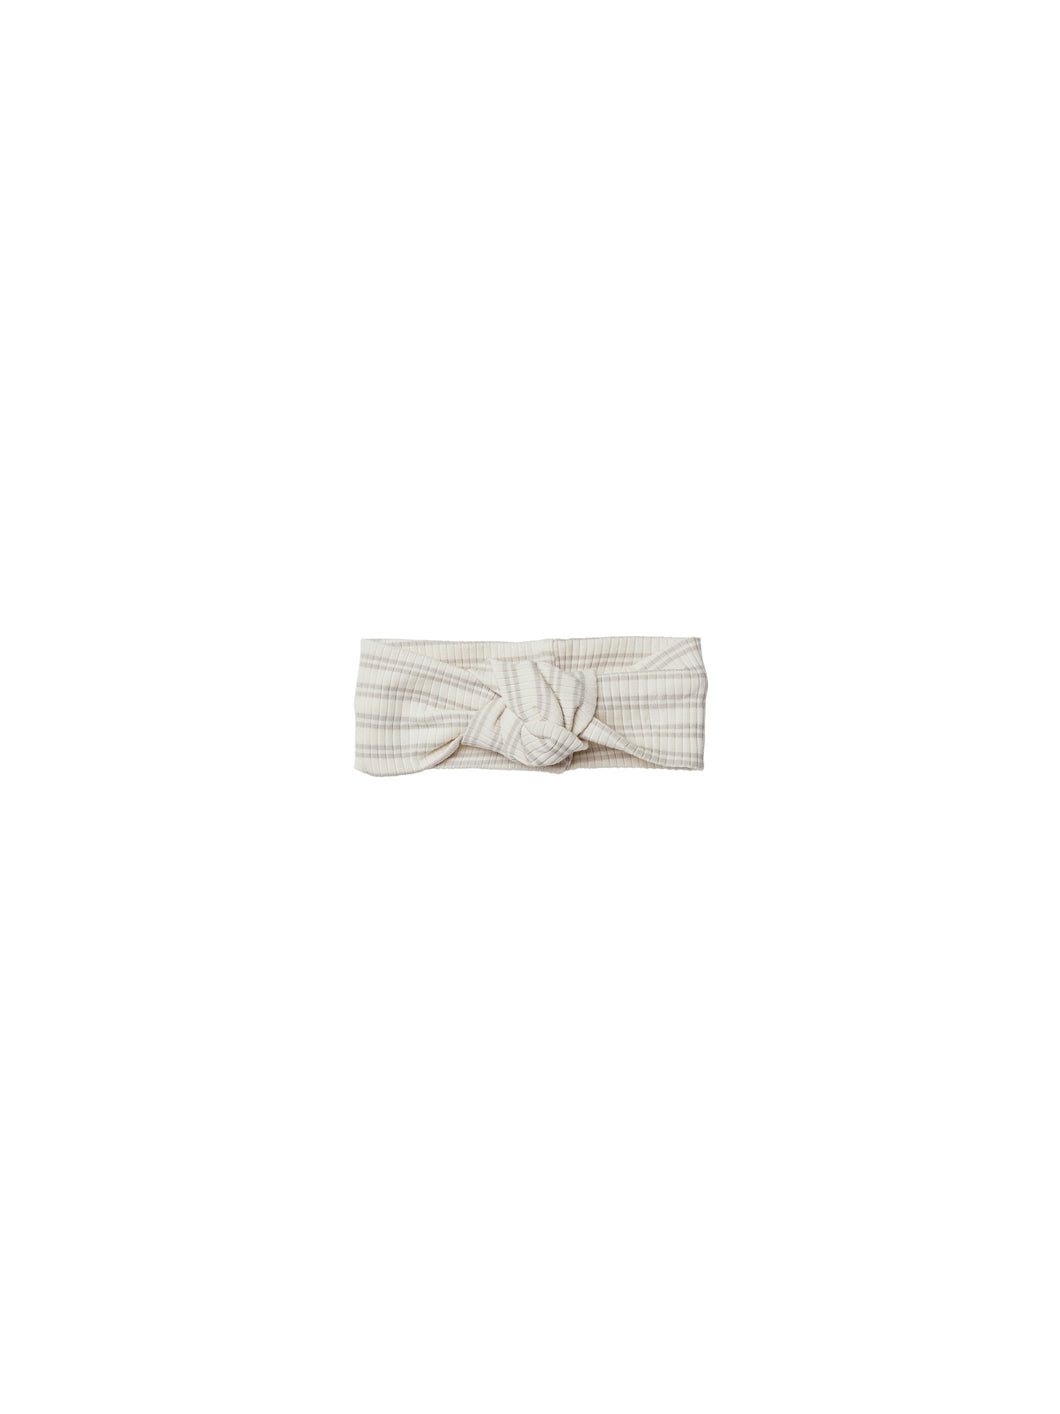 Silver Stripe Ribbed Knotted Headband